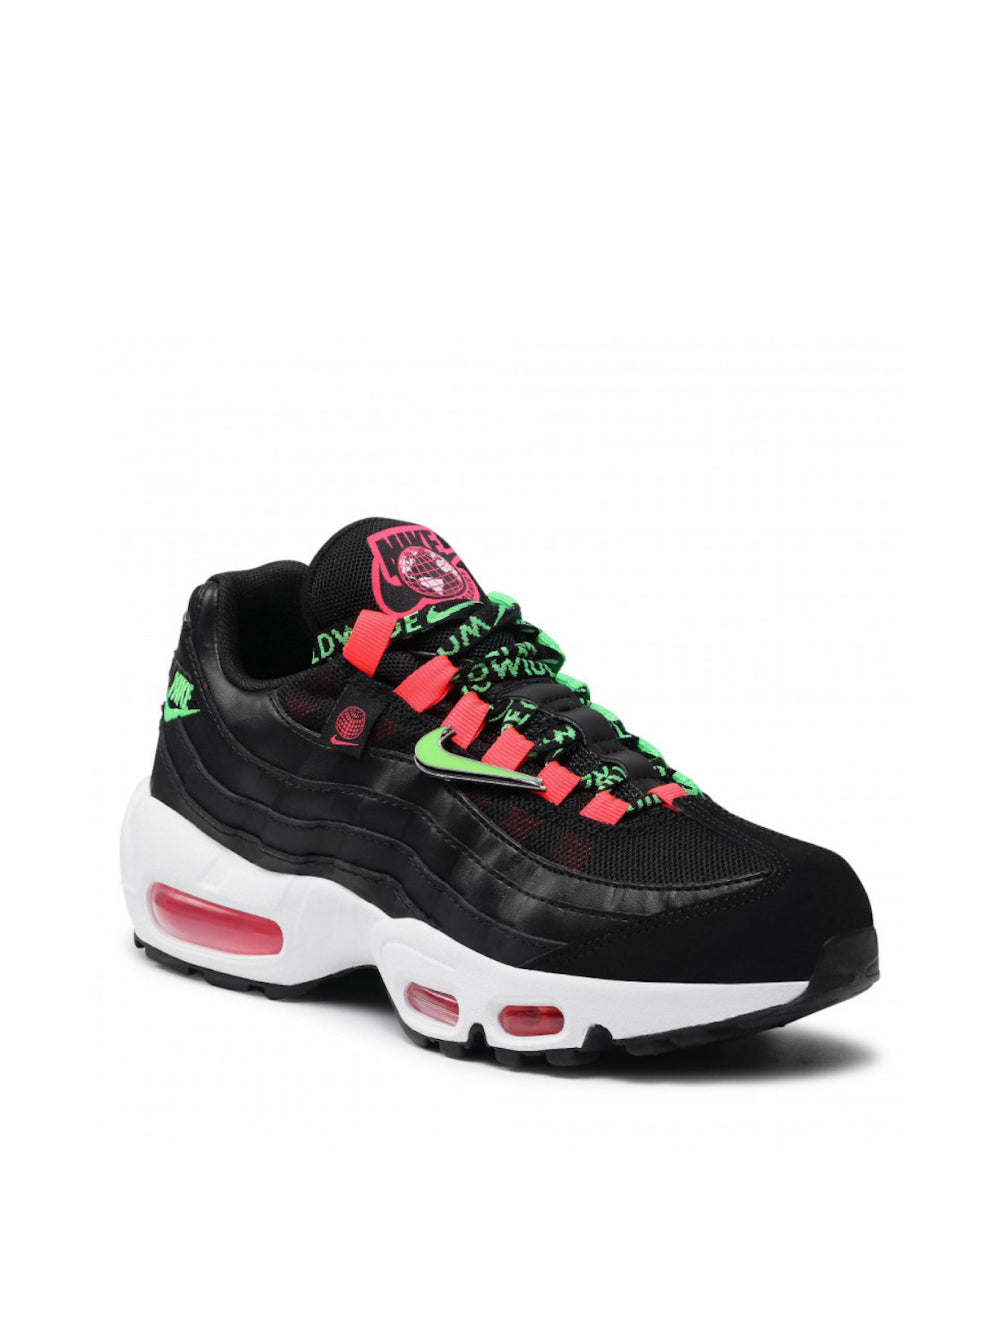 Nike-OUTLET-SALE-Air Max 95 SE Worldwide Sneakers-ARCHIVIST